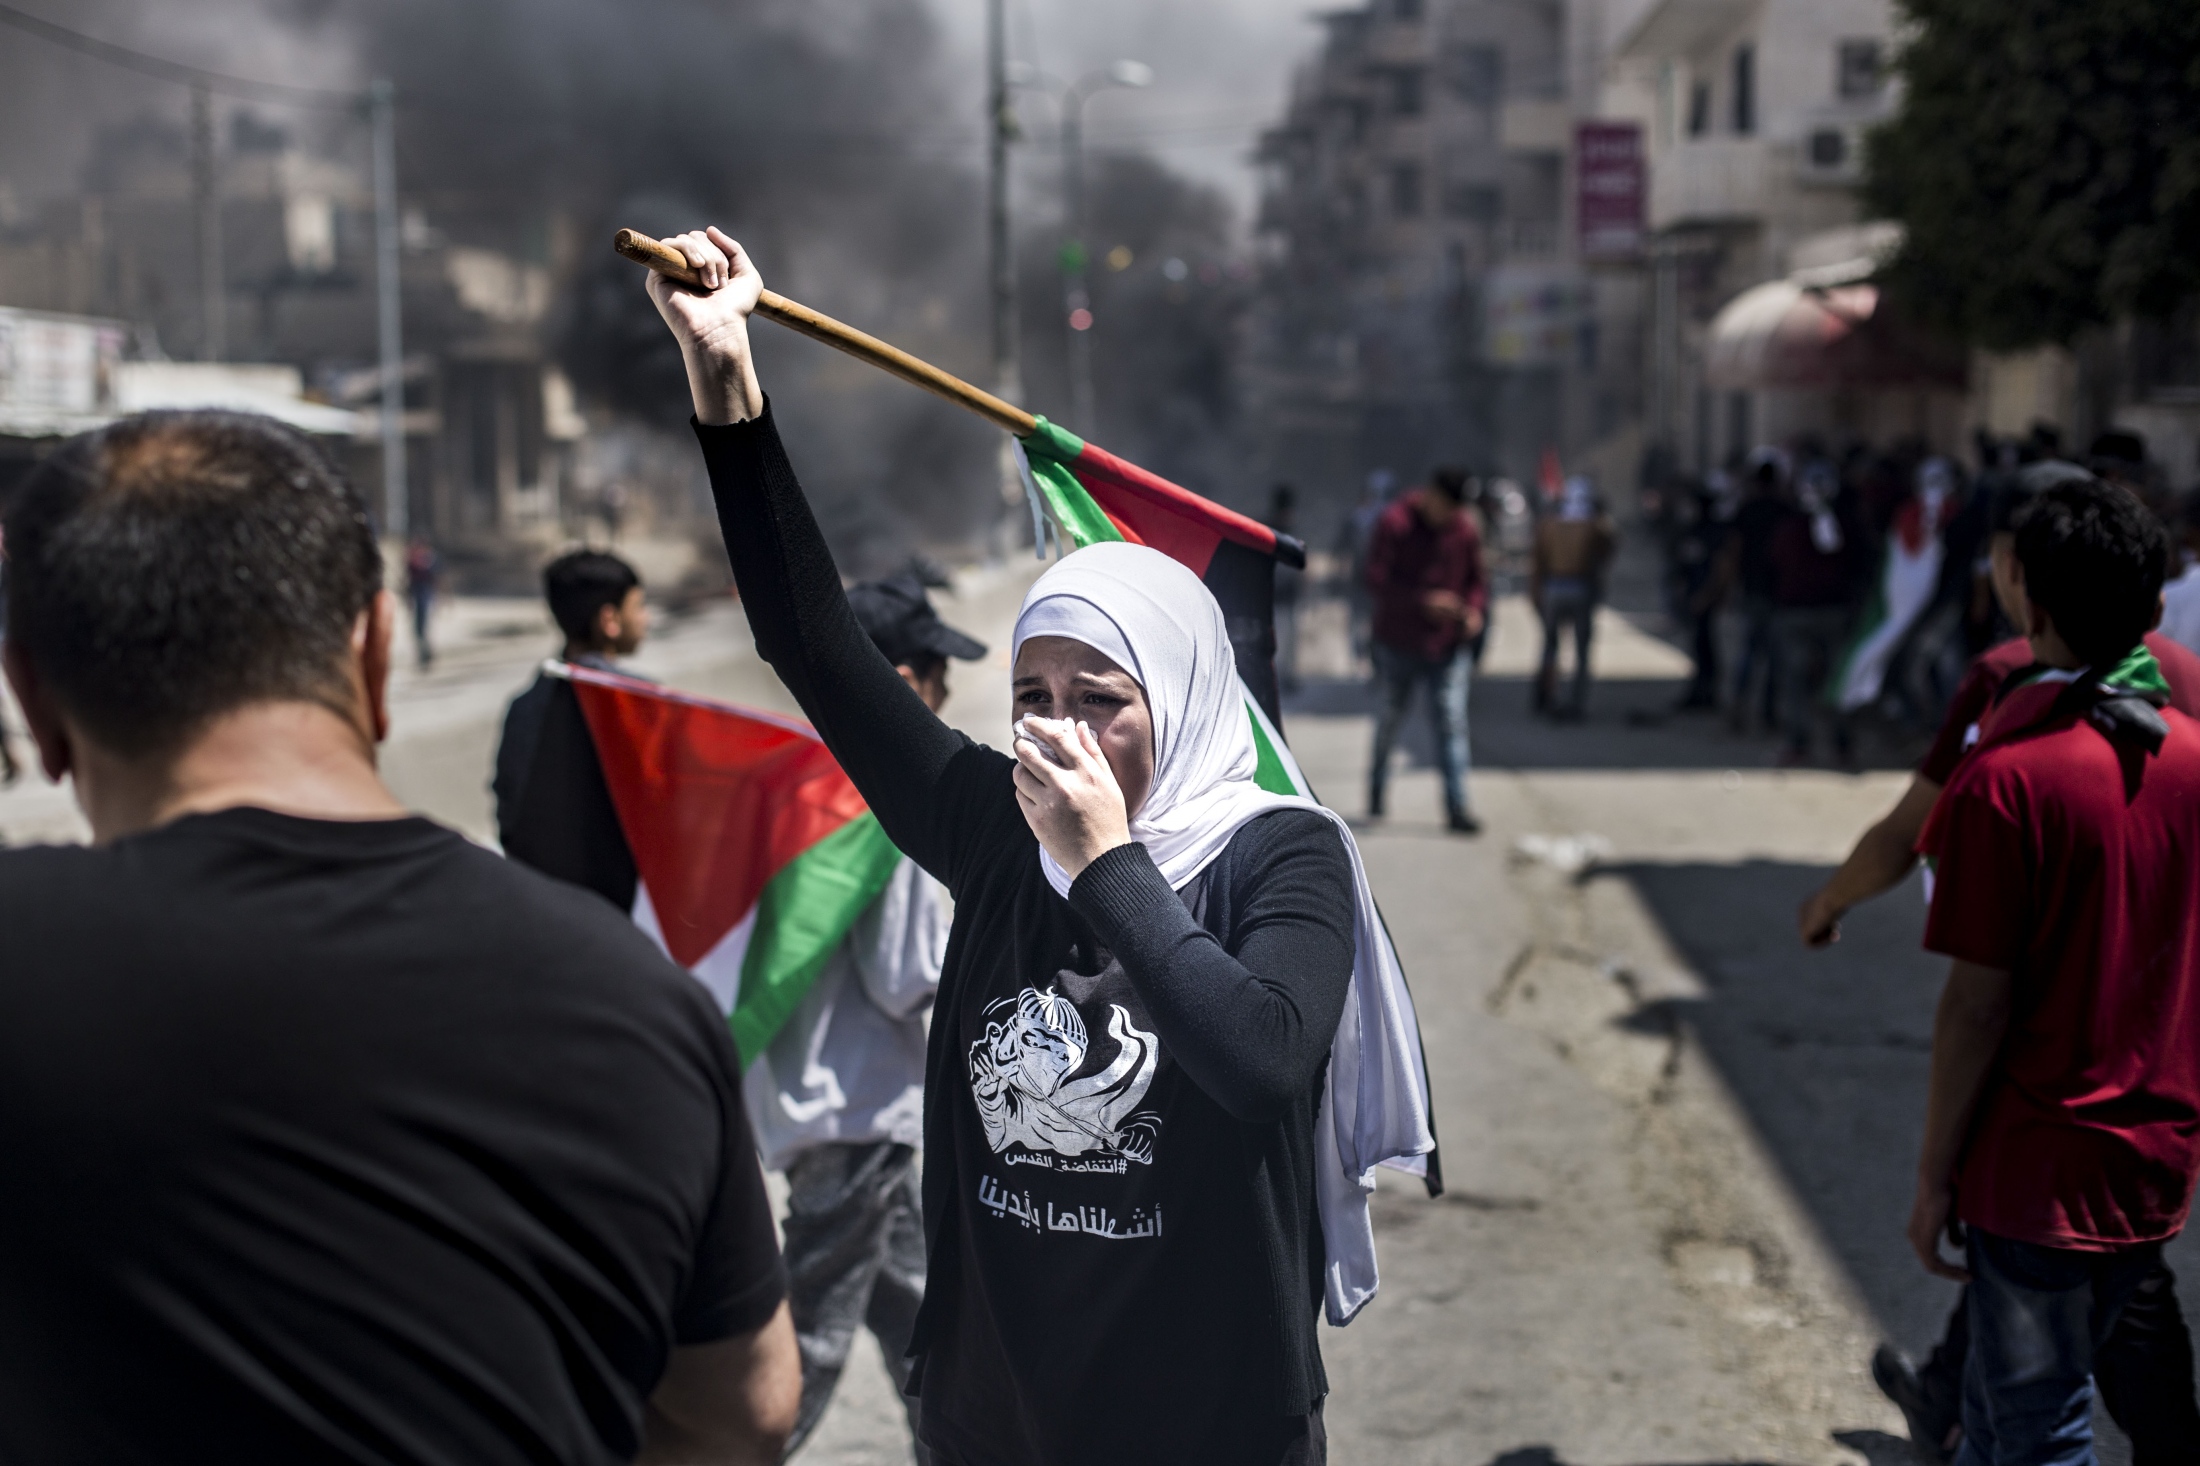 Clashes in Occupied West Bank